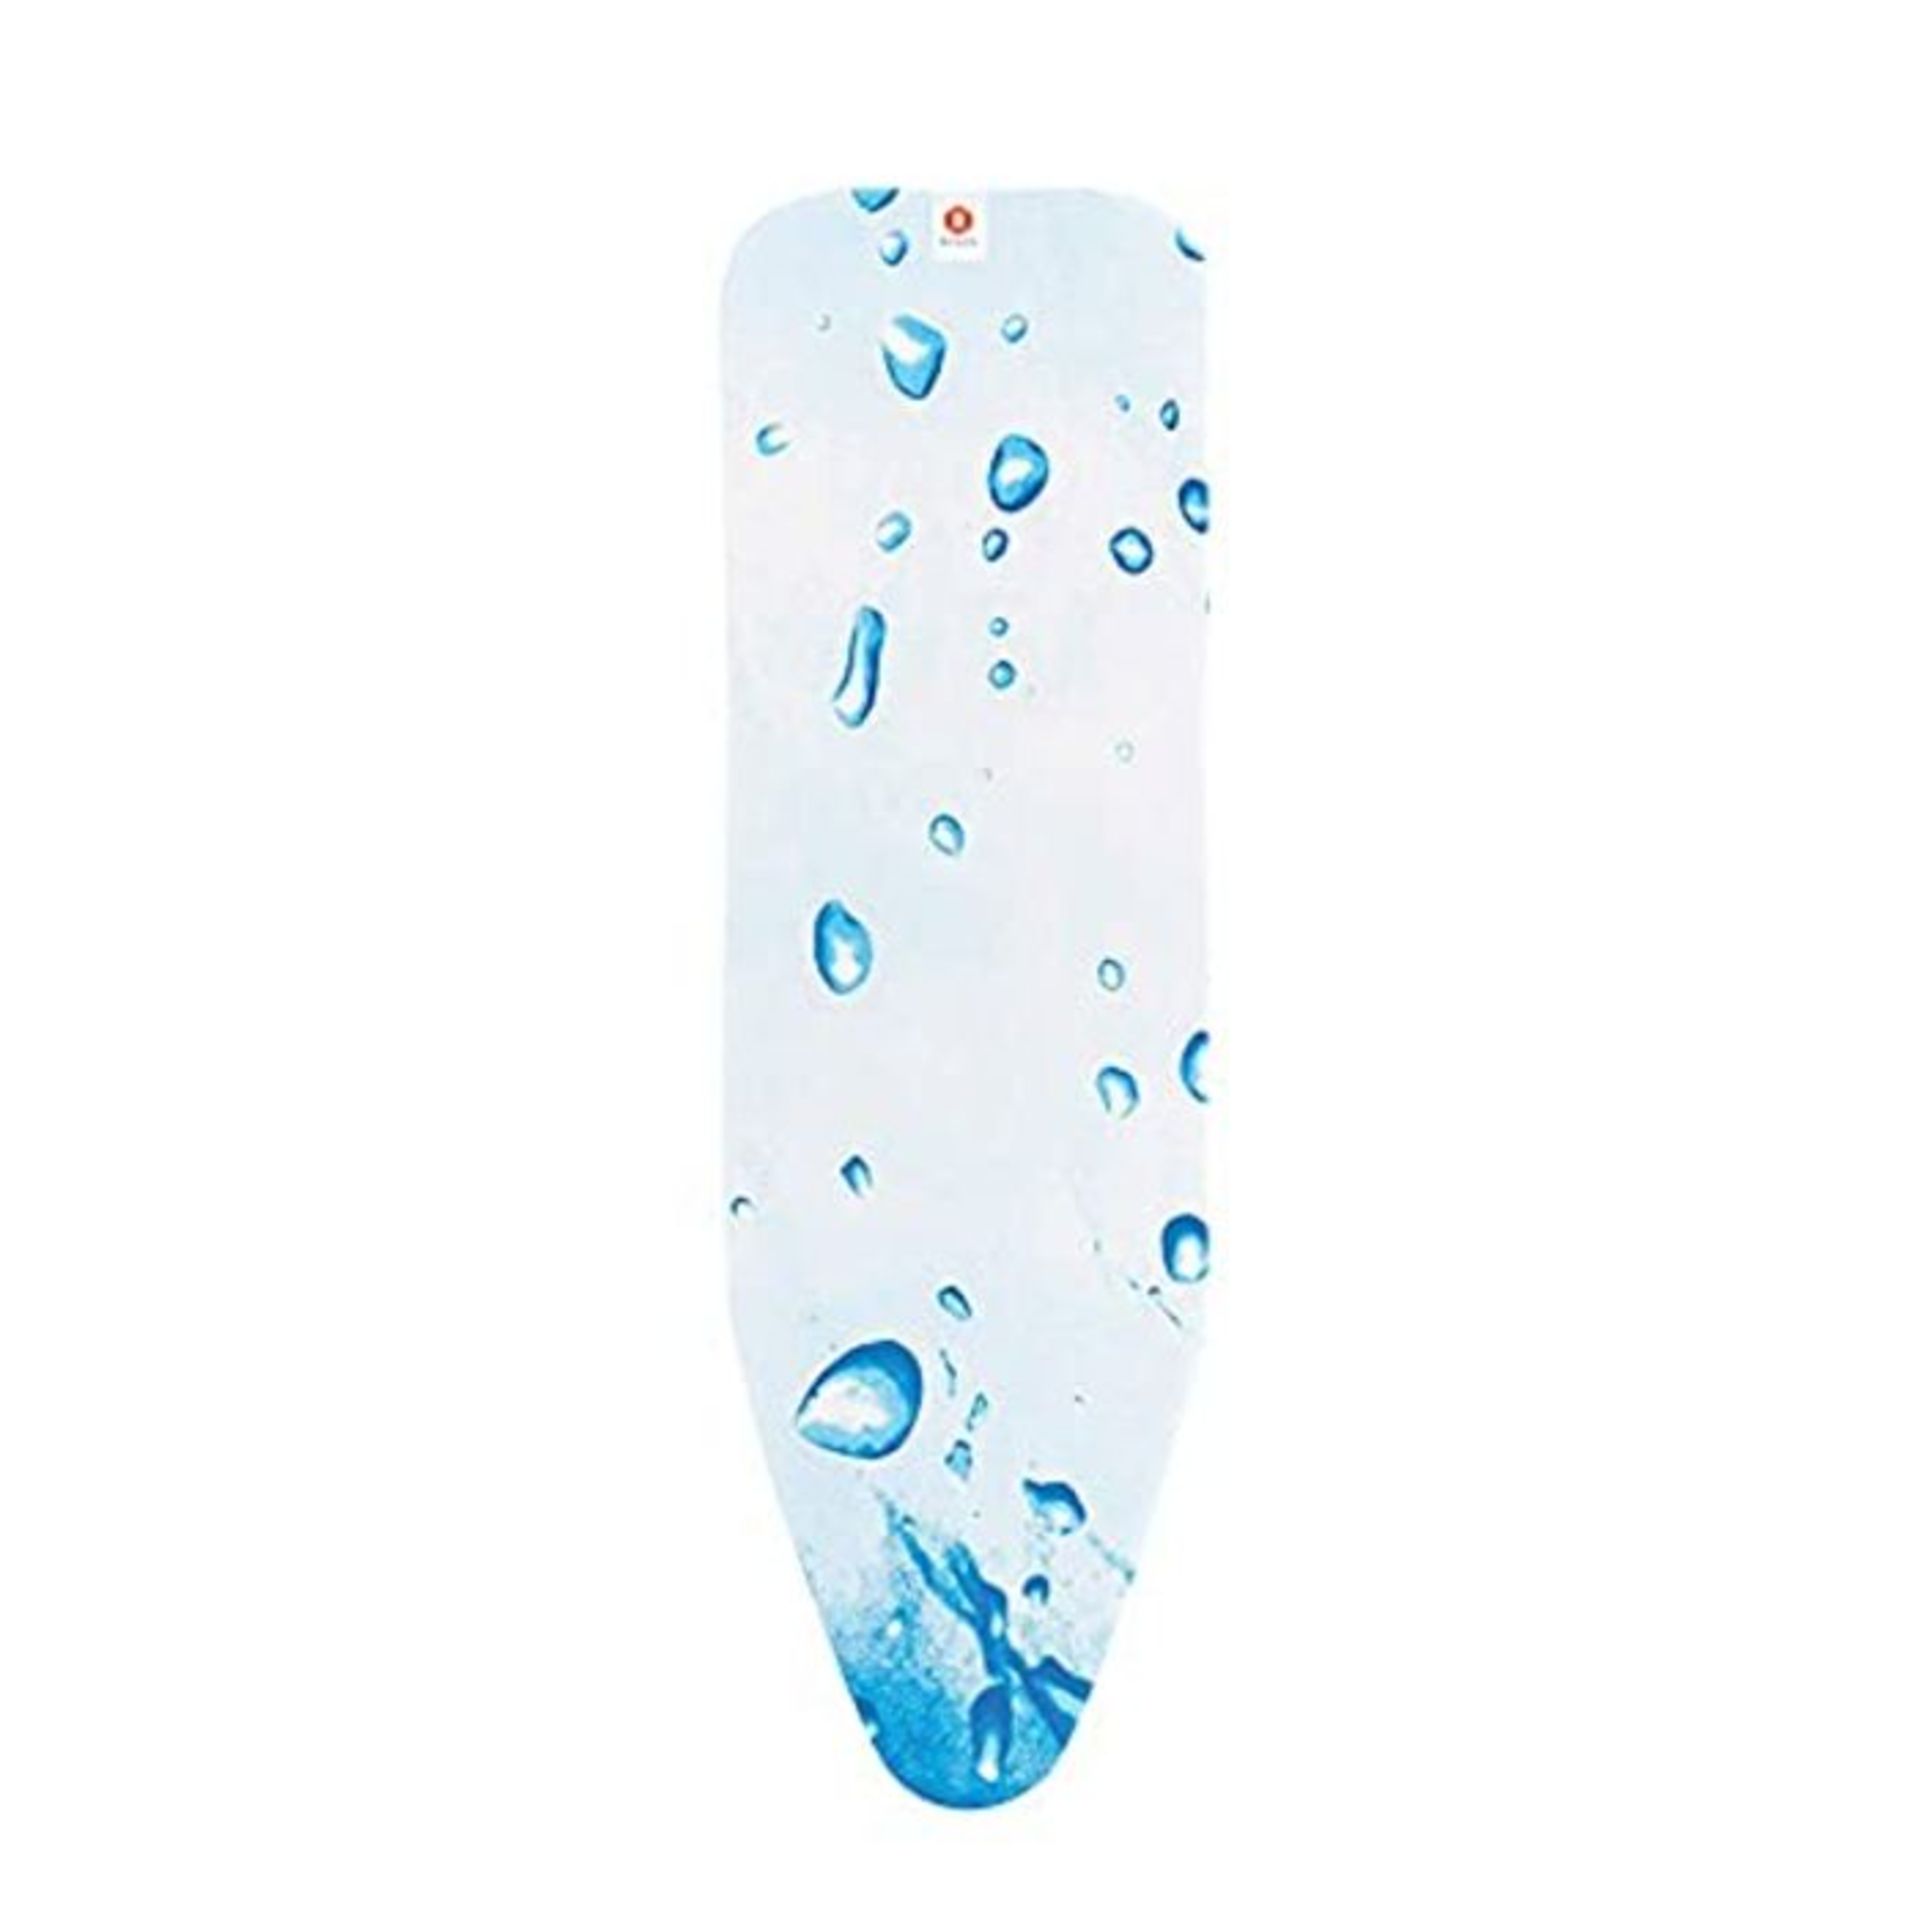 Brabantia Size B (124 x 38cm) Replacement Ironing Board Cover with Durable 2mm Foam La